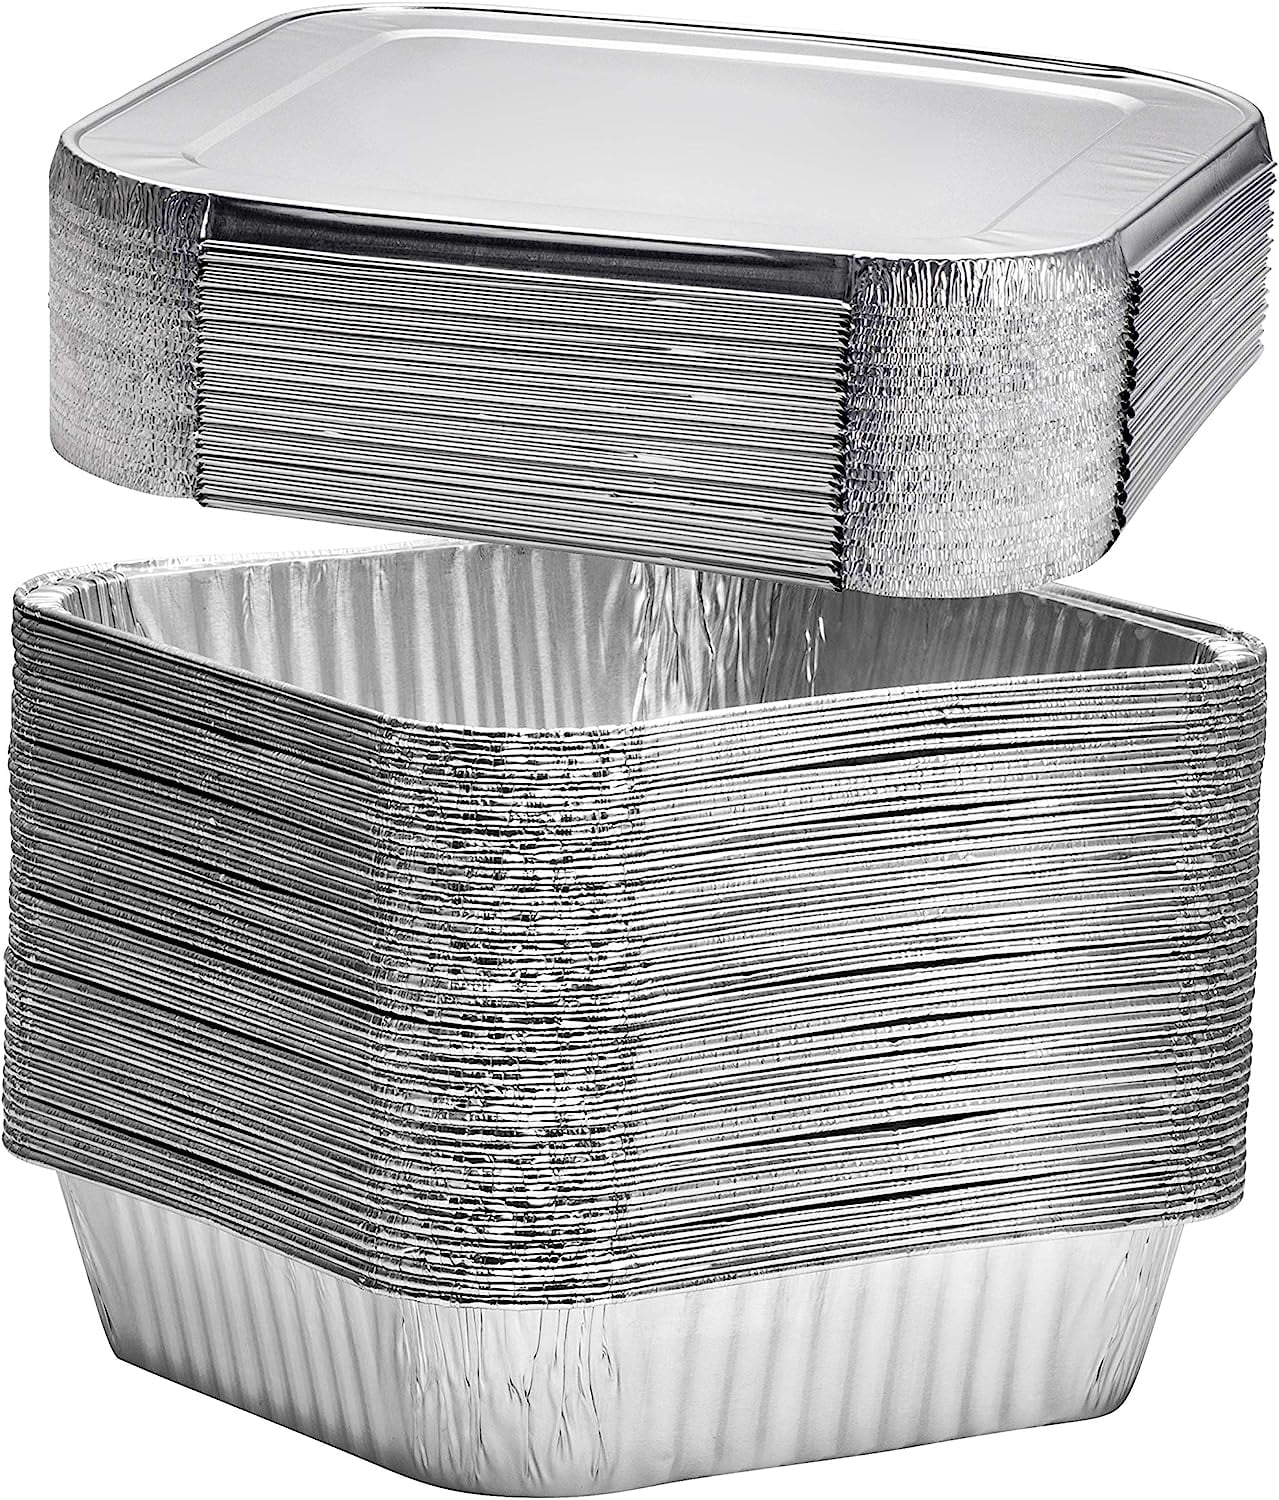 Diplastible 11x7 Disposable Aluminum Pans with Covers - 10 Pack - Pan with  Foil Lids Perfect for Baking Cooking Food and Storage Container